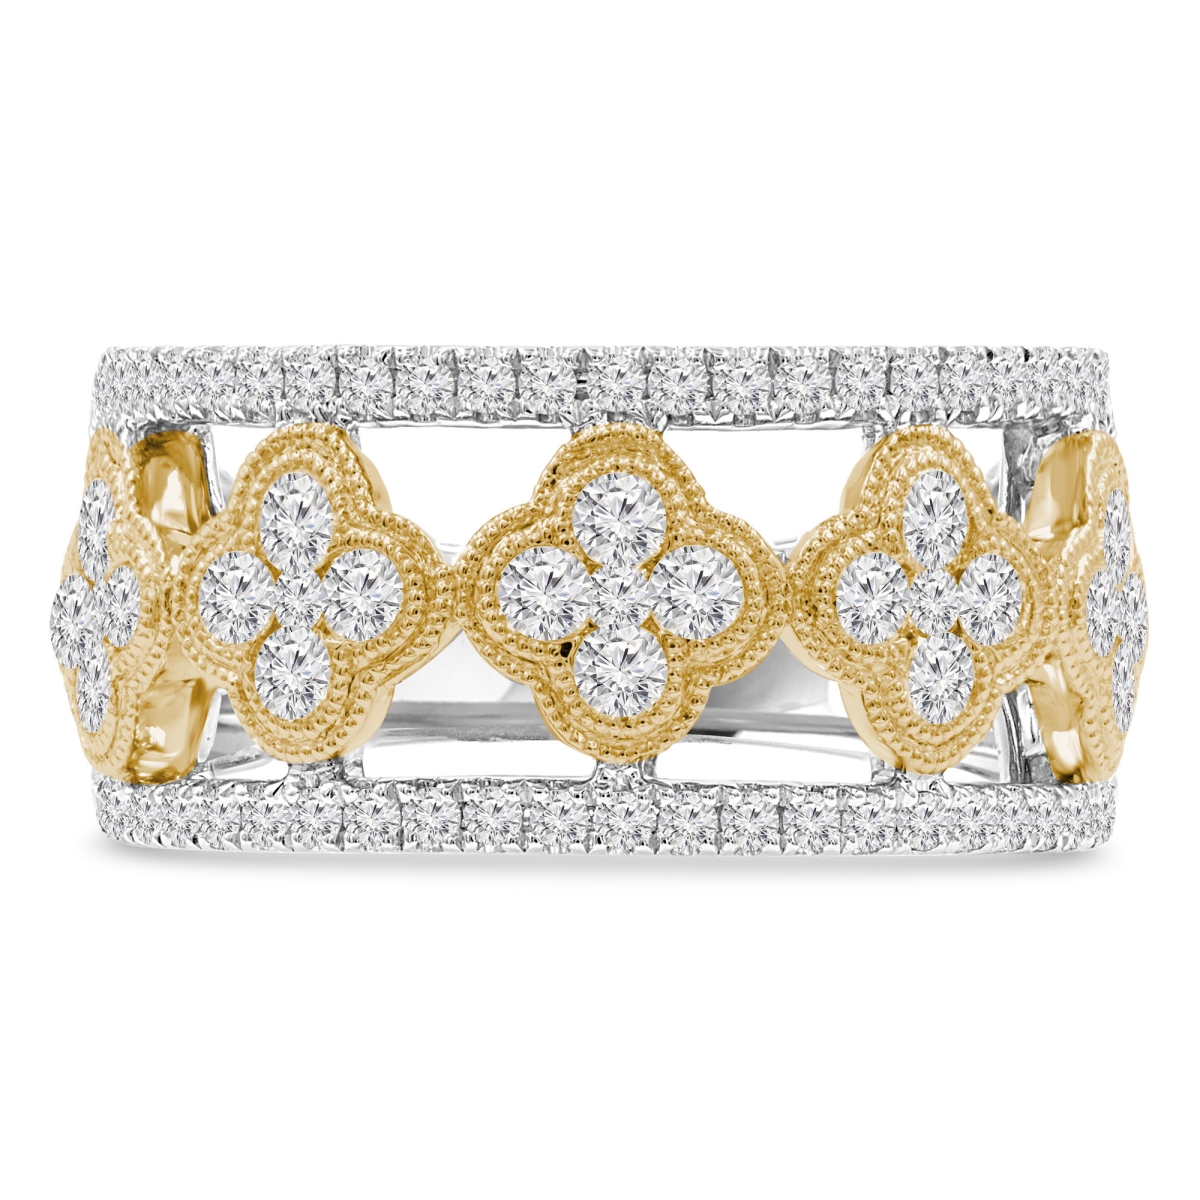 Picture of Majesty Diamonds MDR210140-3 1 CTW Round Diamond Cocktail Ring in 14K Two-Tone Gold - Size 3